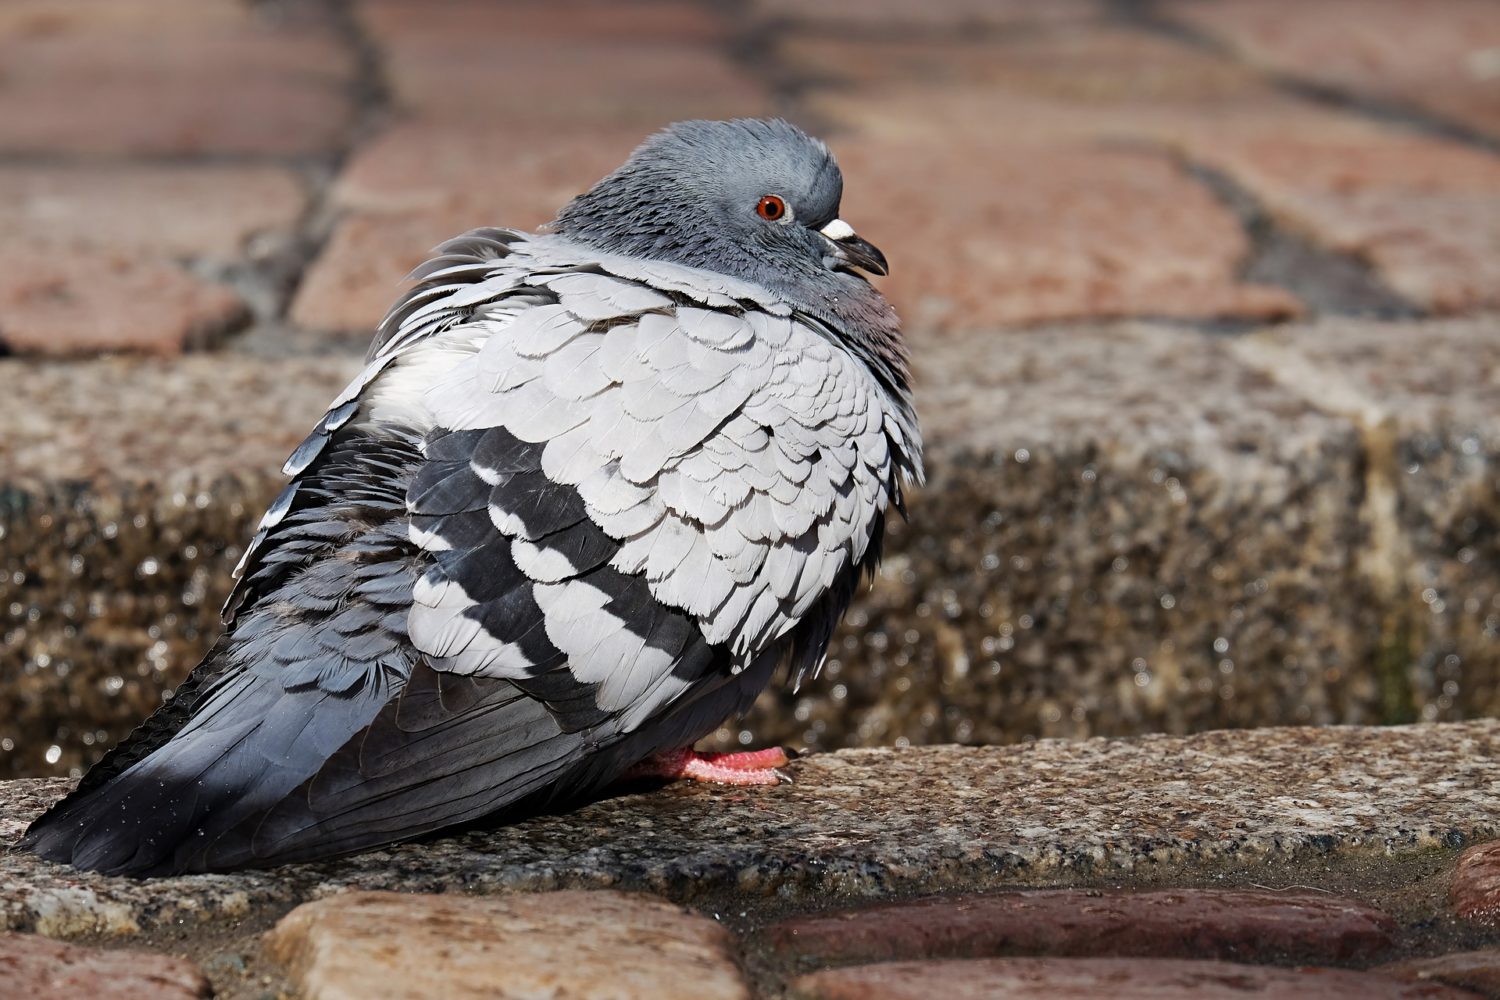 Pigeon with ruffled feathers standing on ground